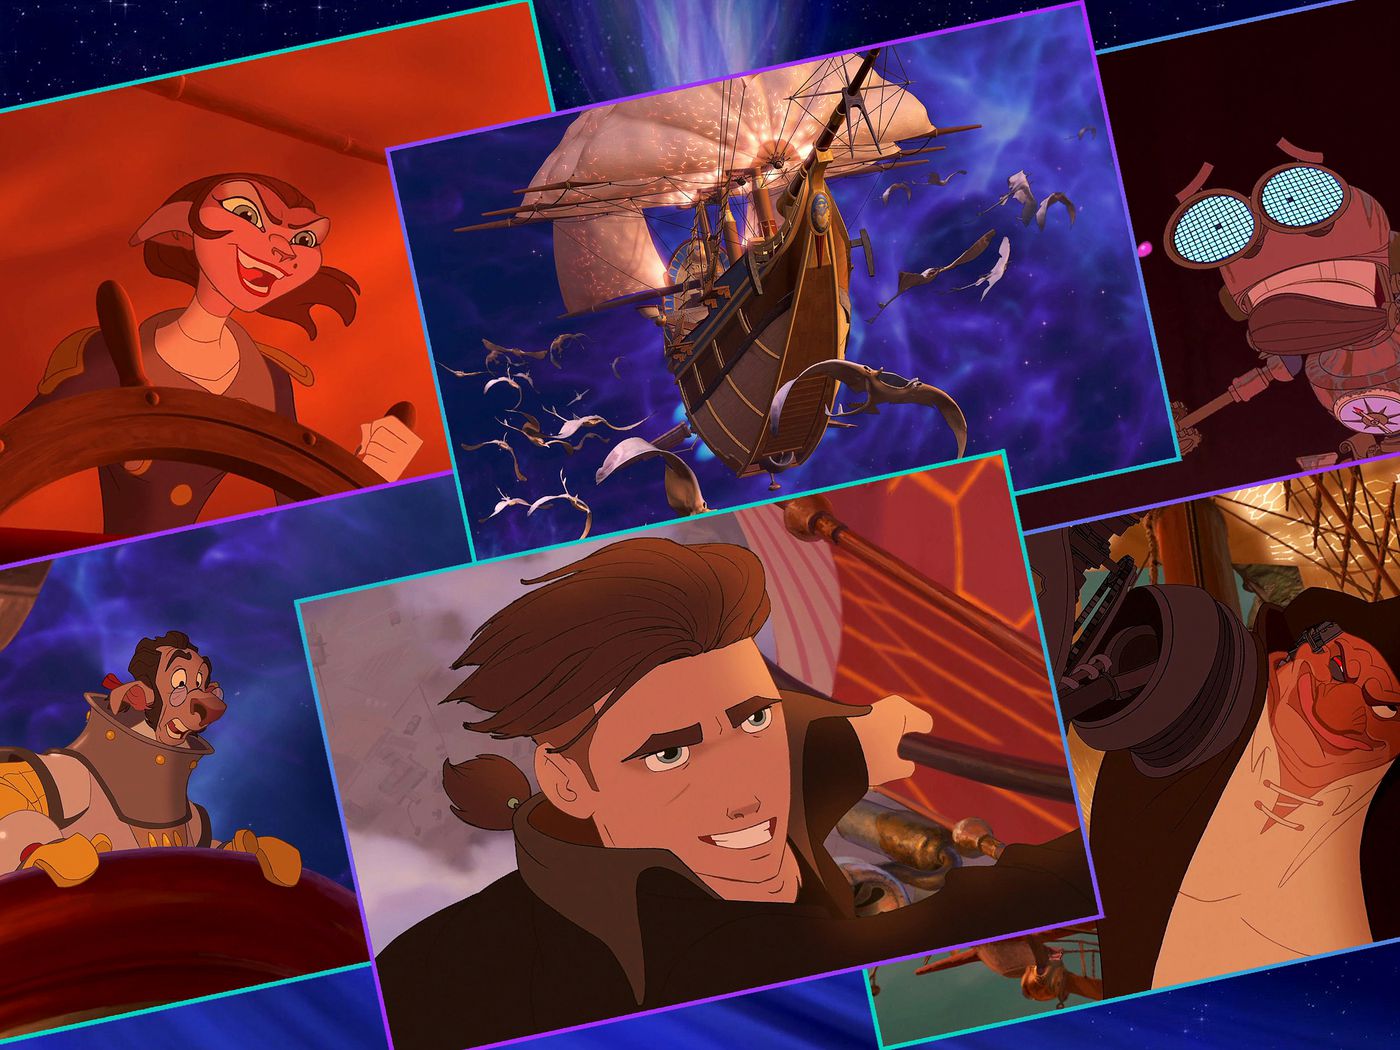 Treasure Planet was a visionary box office bomb for Disney - Polygon